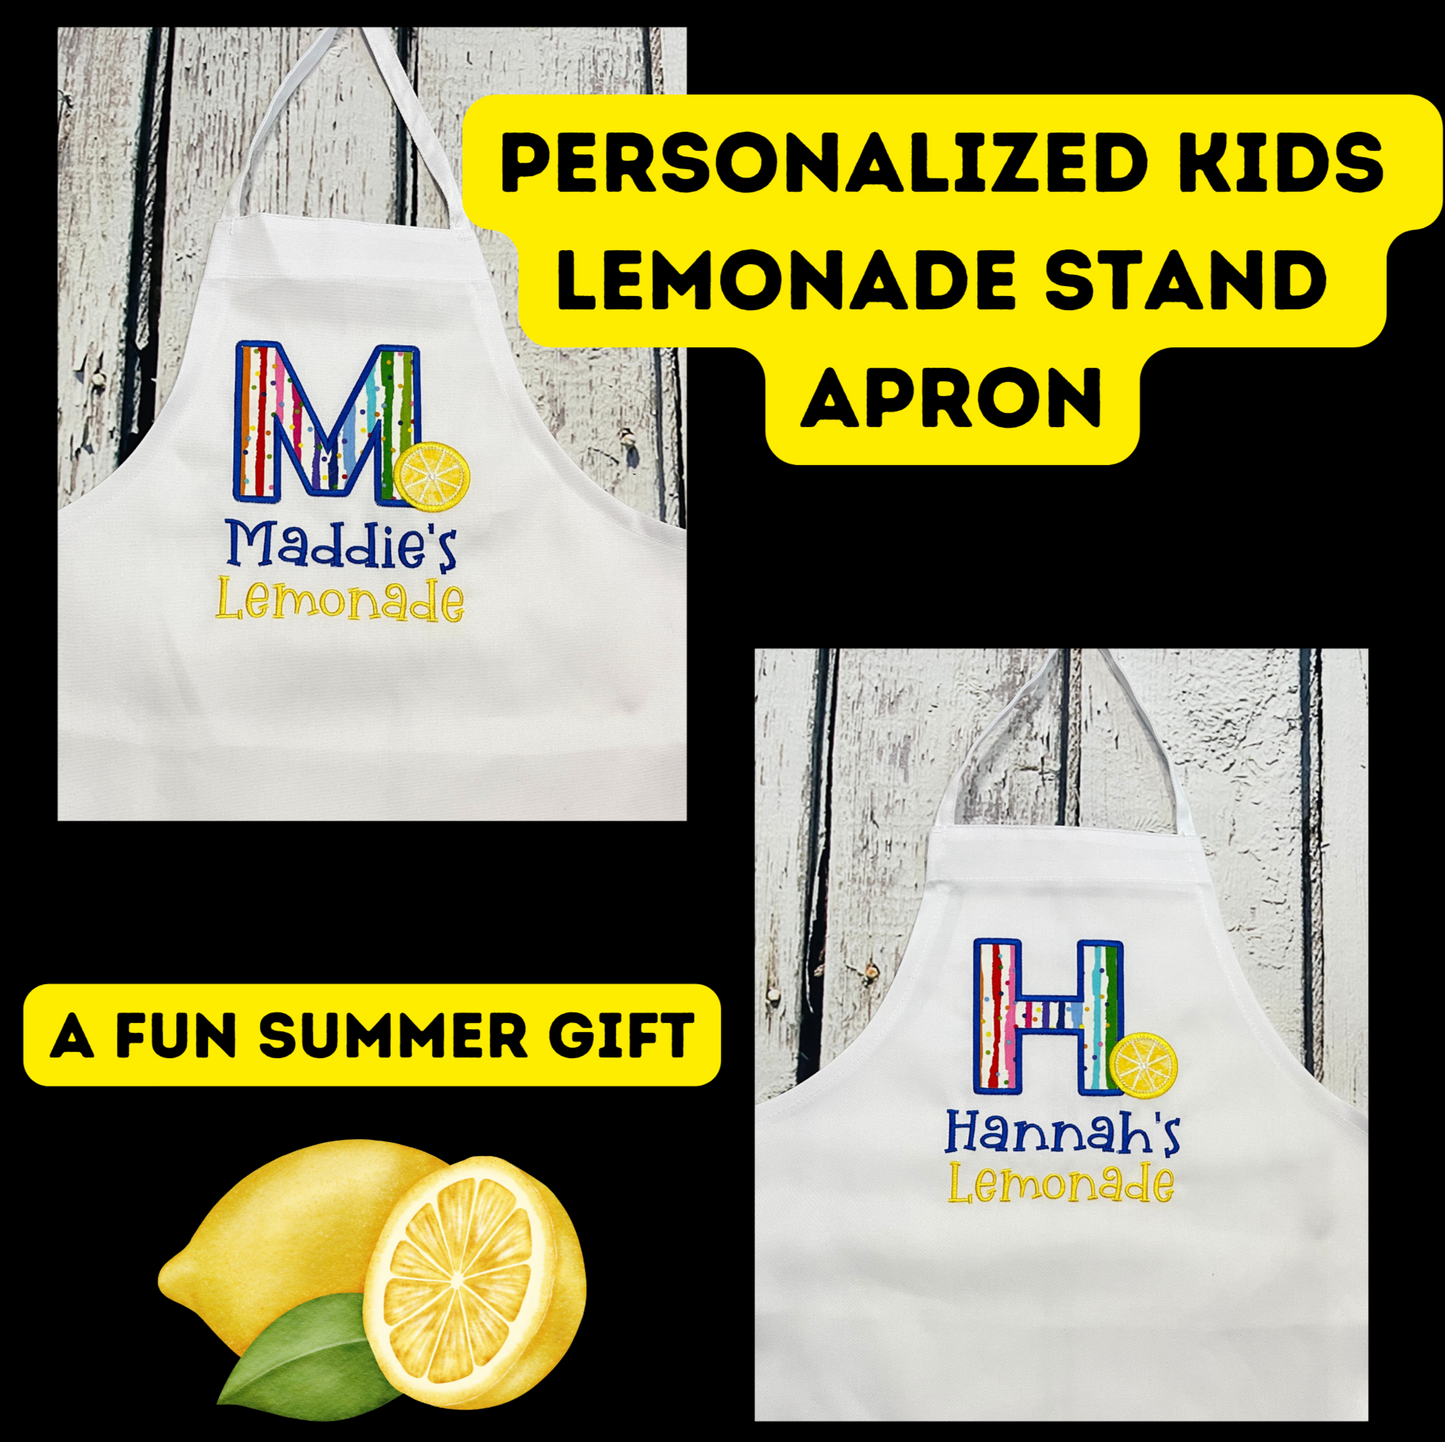 Personalized child's lemonade stand apron with vibrant colors and beautiful embroidery